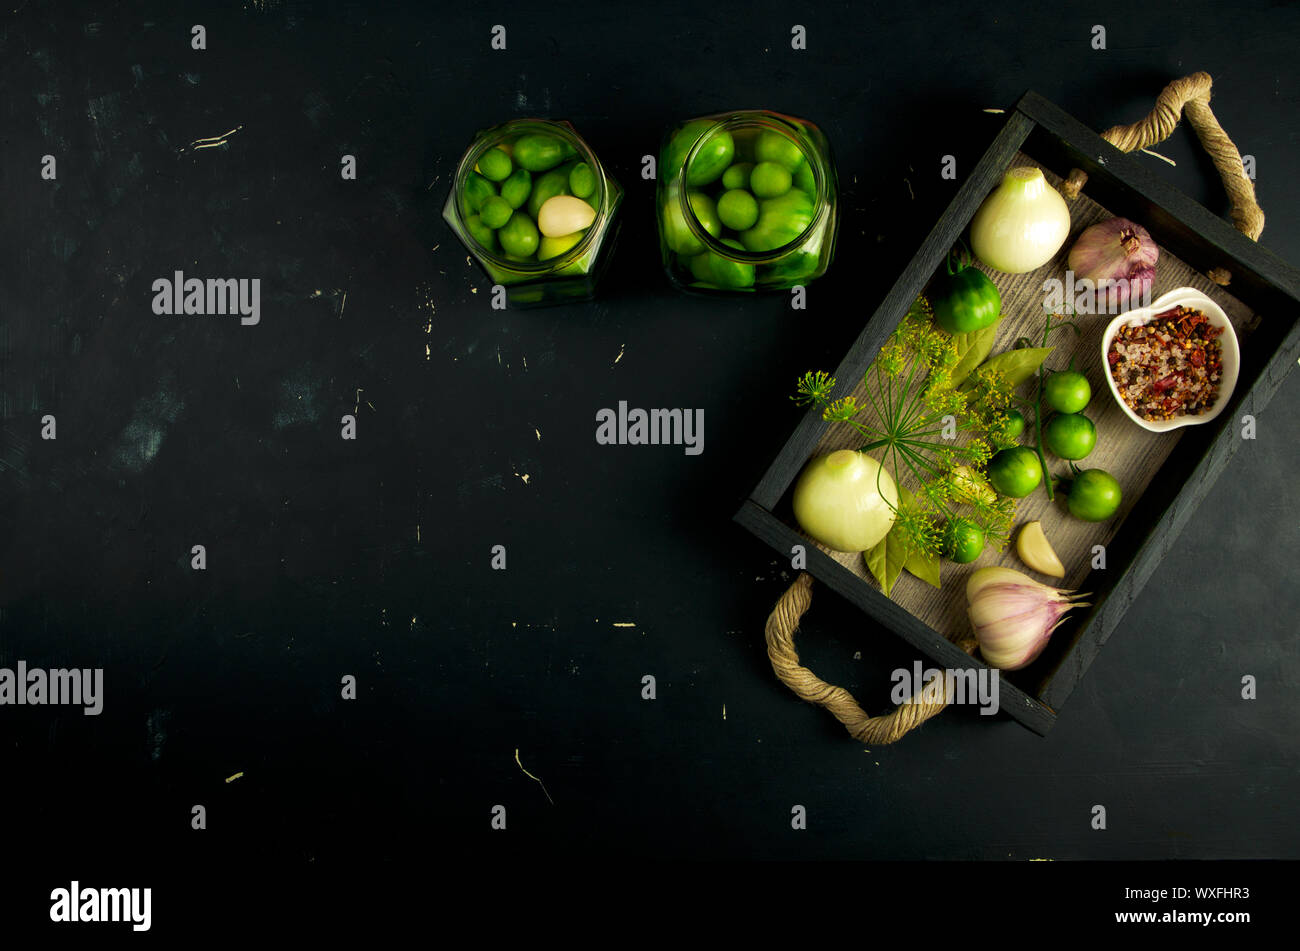 TEXTURE OF VEGETABLES IN A BOX ON A DARK BACKGROUND. CONCEPT OF PREPARING VEGETABLES FOR WINTER. Stock Photo